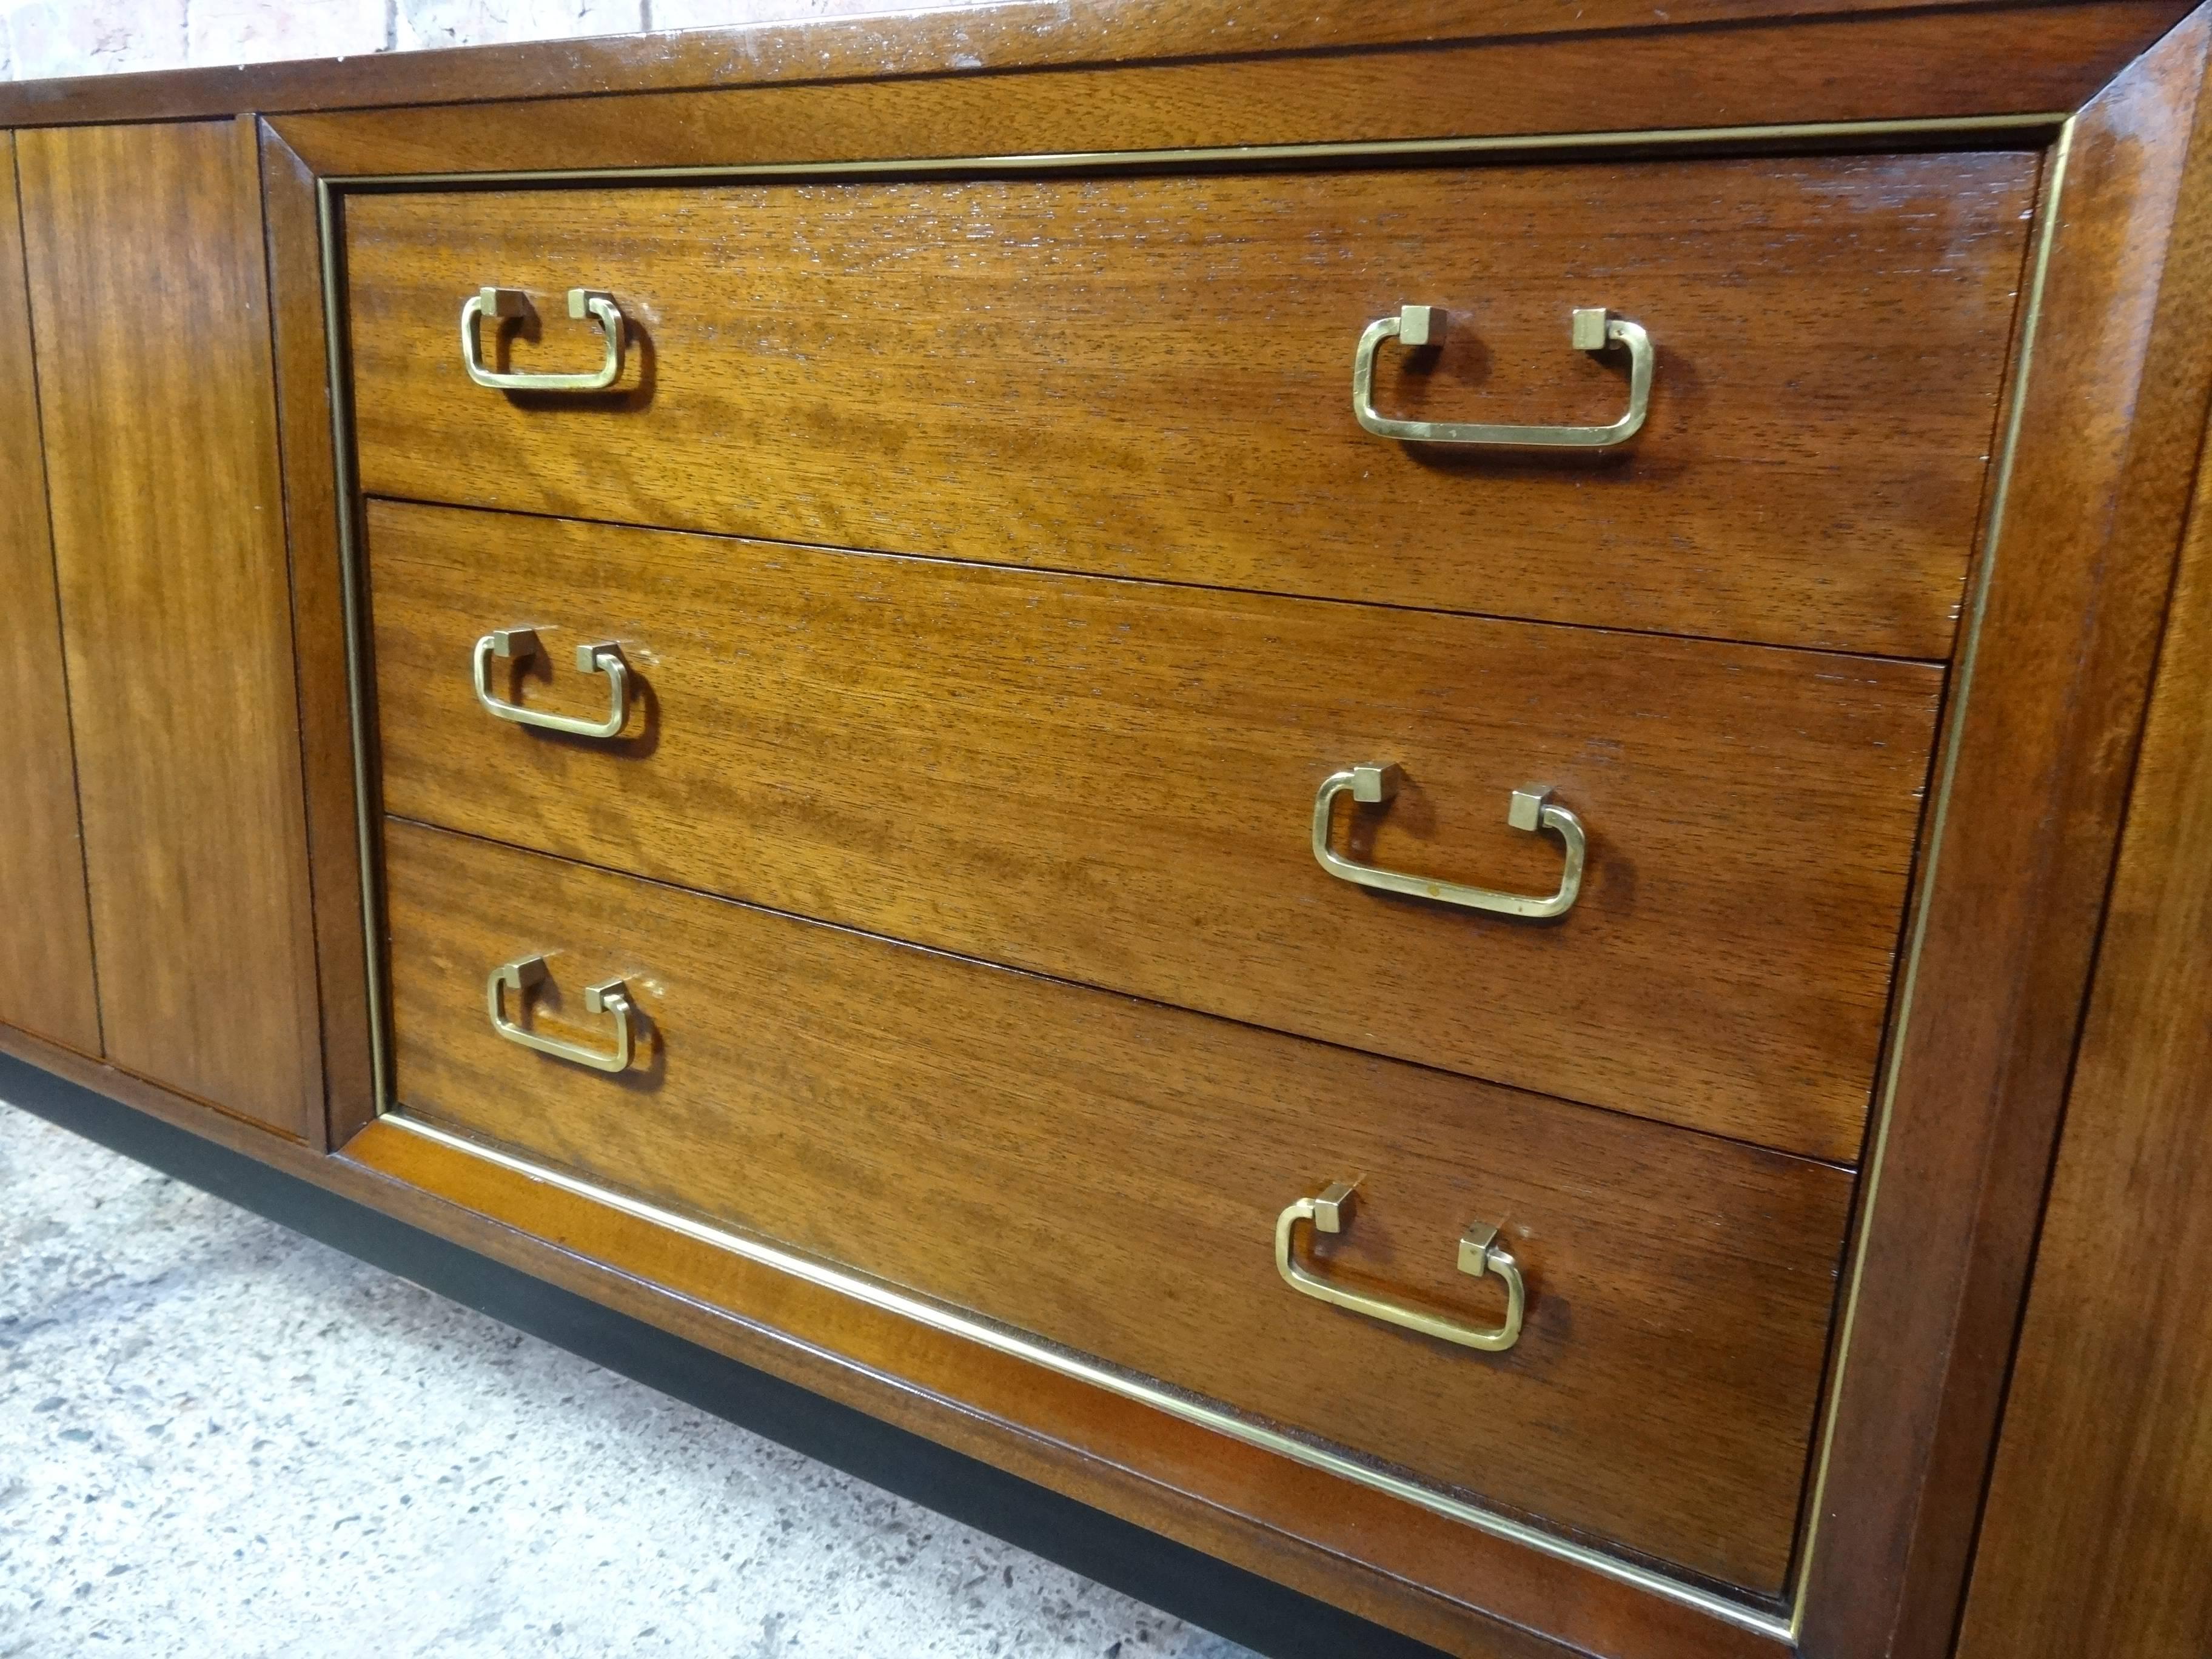 British Sought after Vintage Retro E Gomme Teak Sideboard with Brass Handles from 1950s